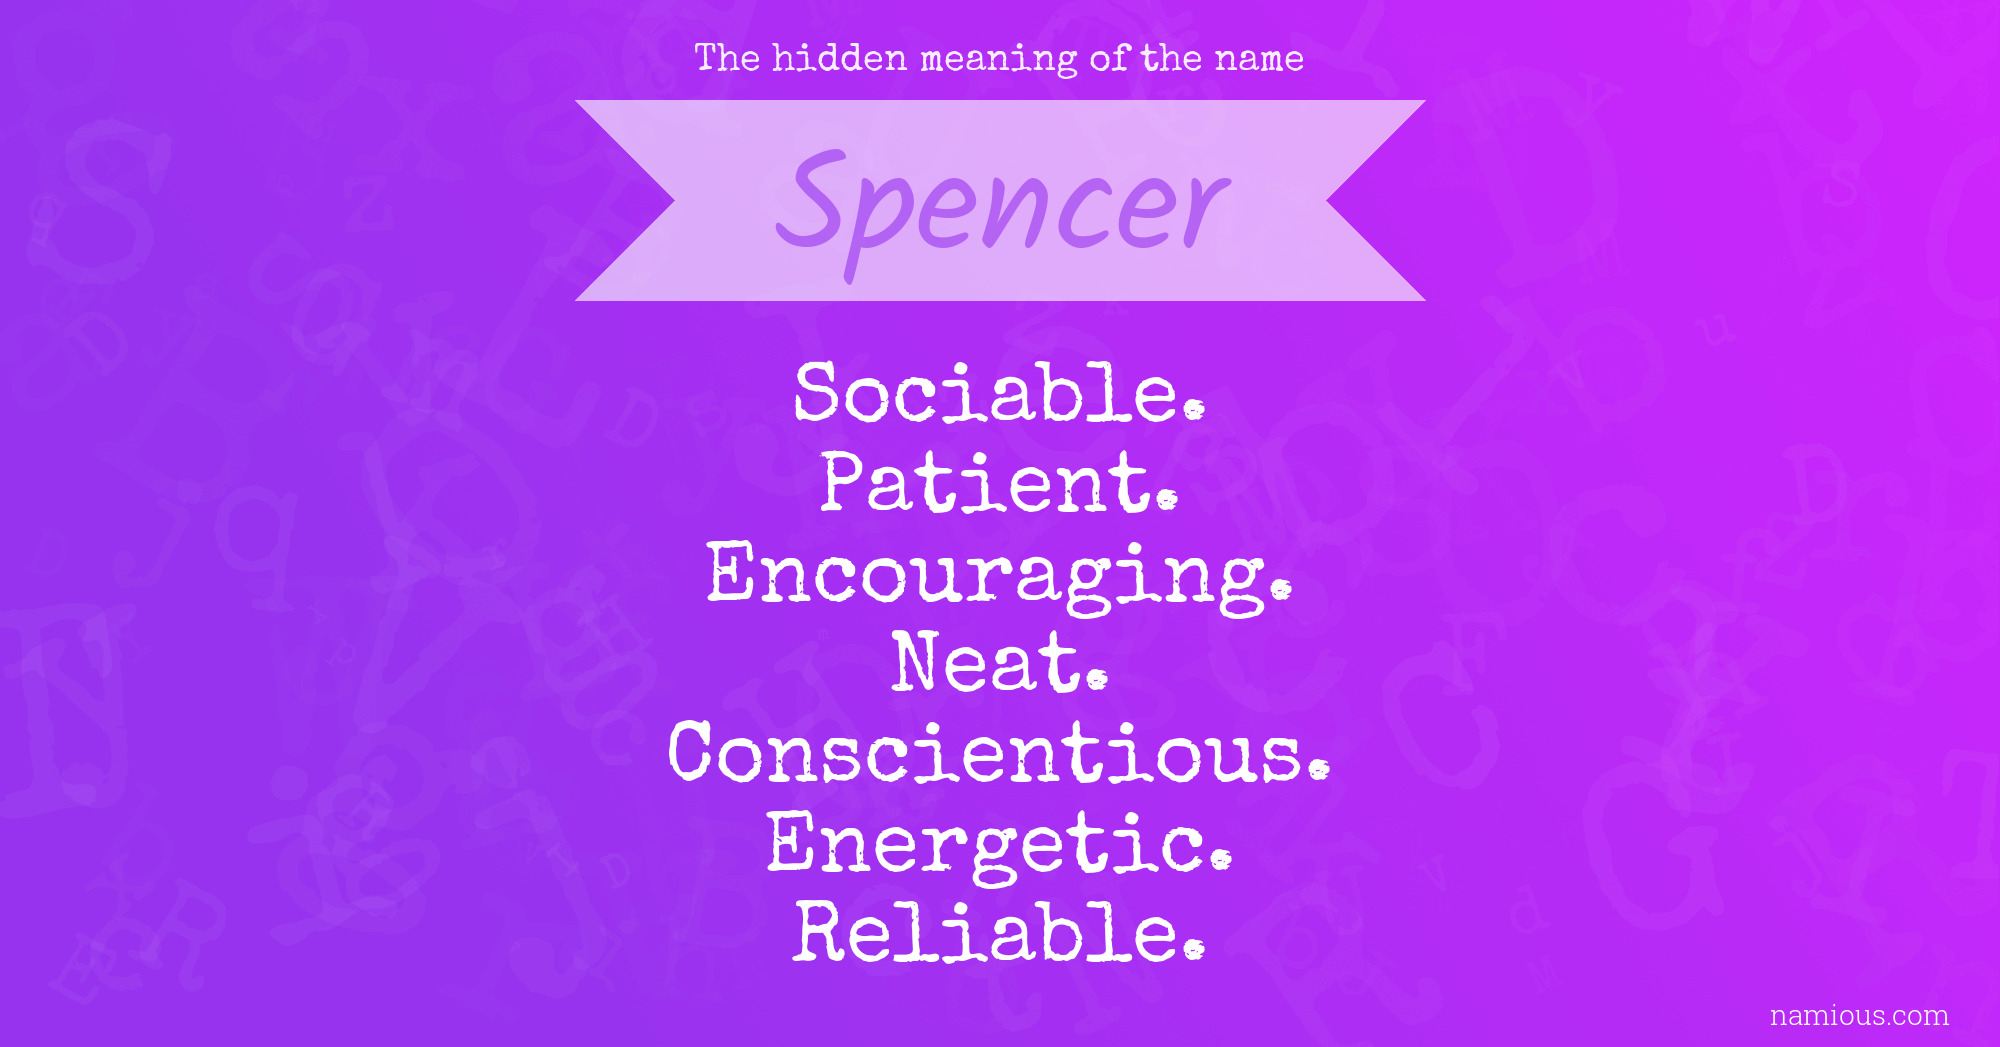 The hidden meaning of the name Spencer